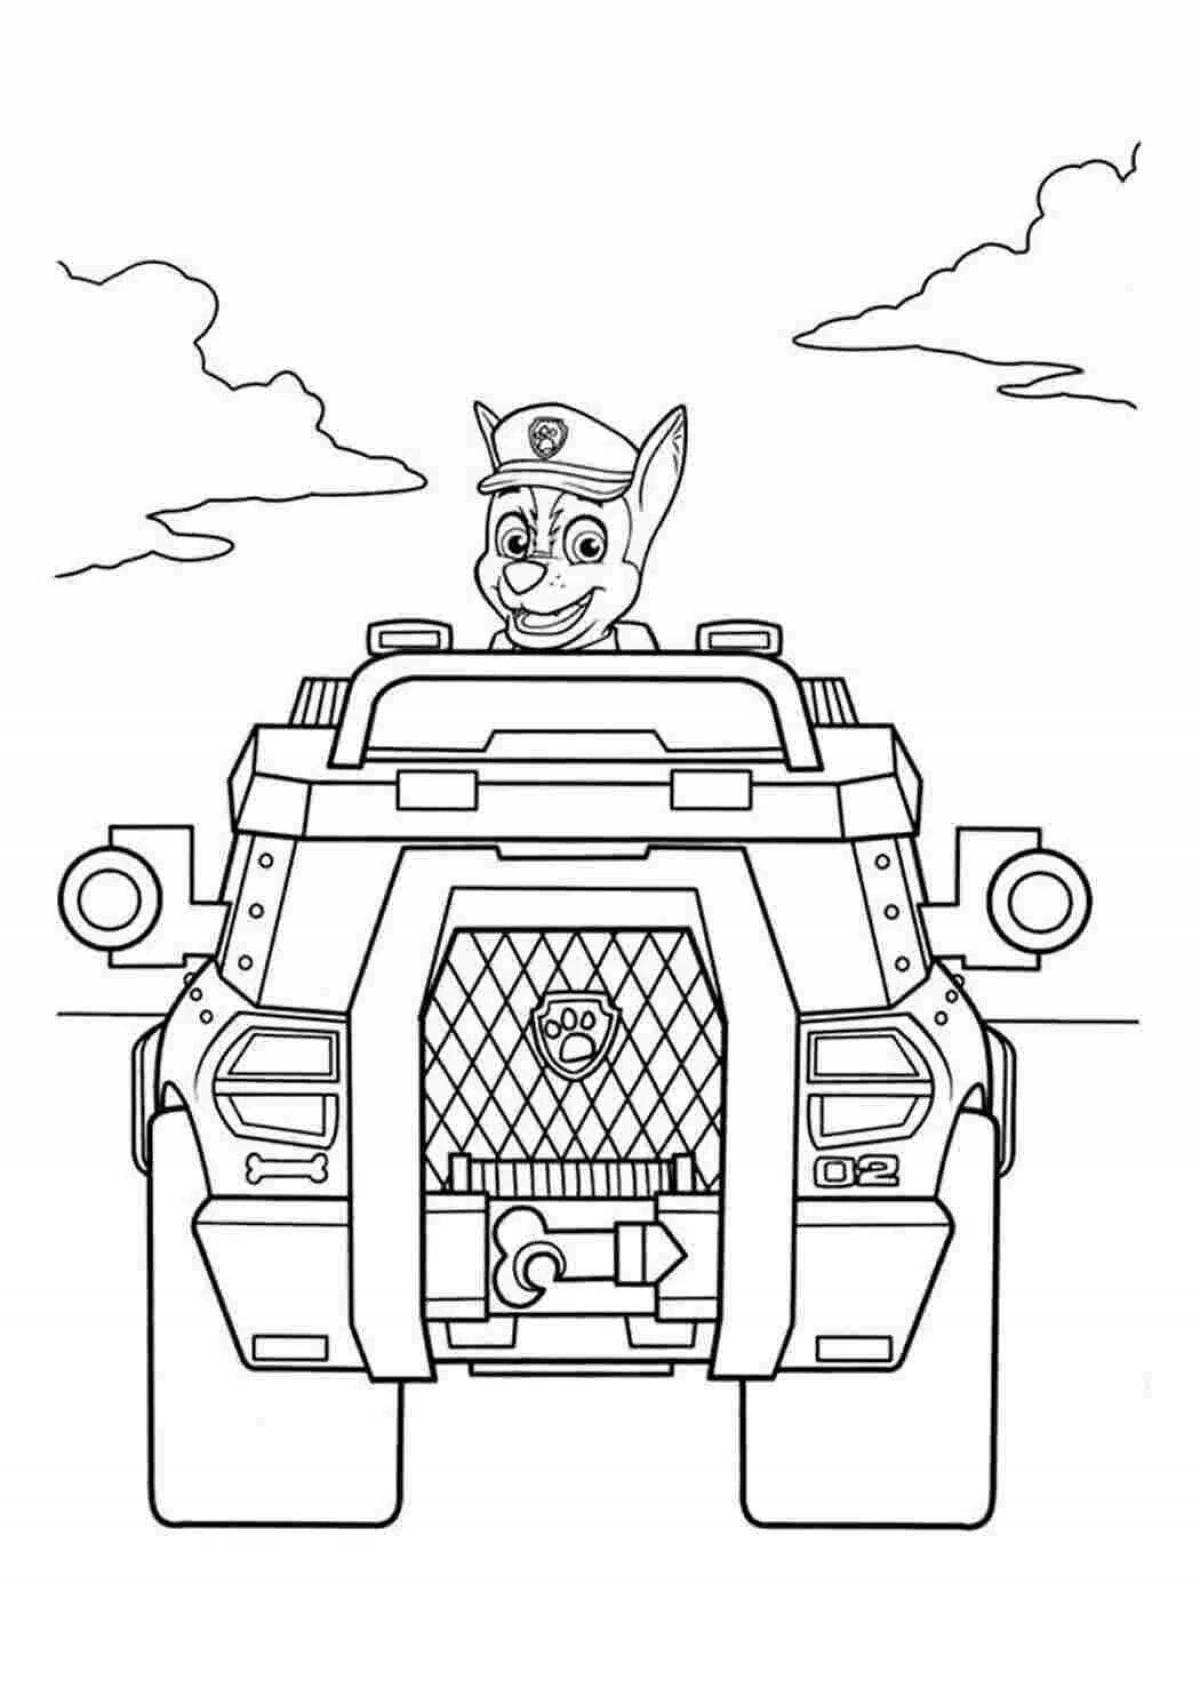 Coloring page paw patrol with cars